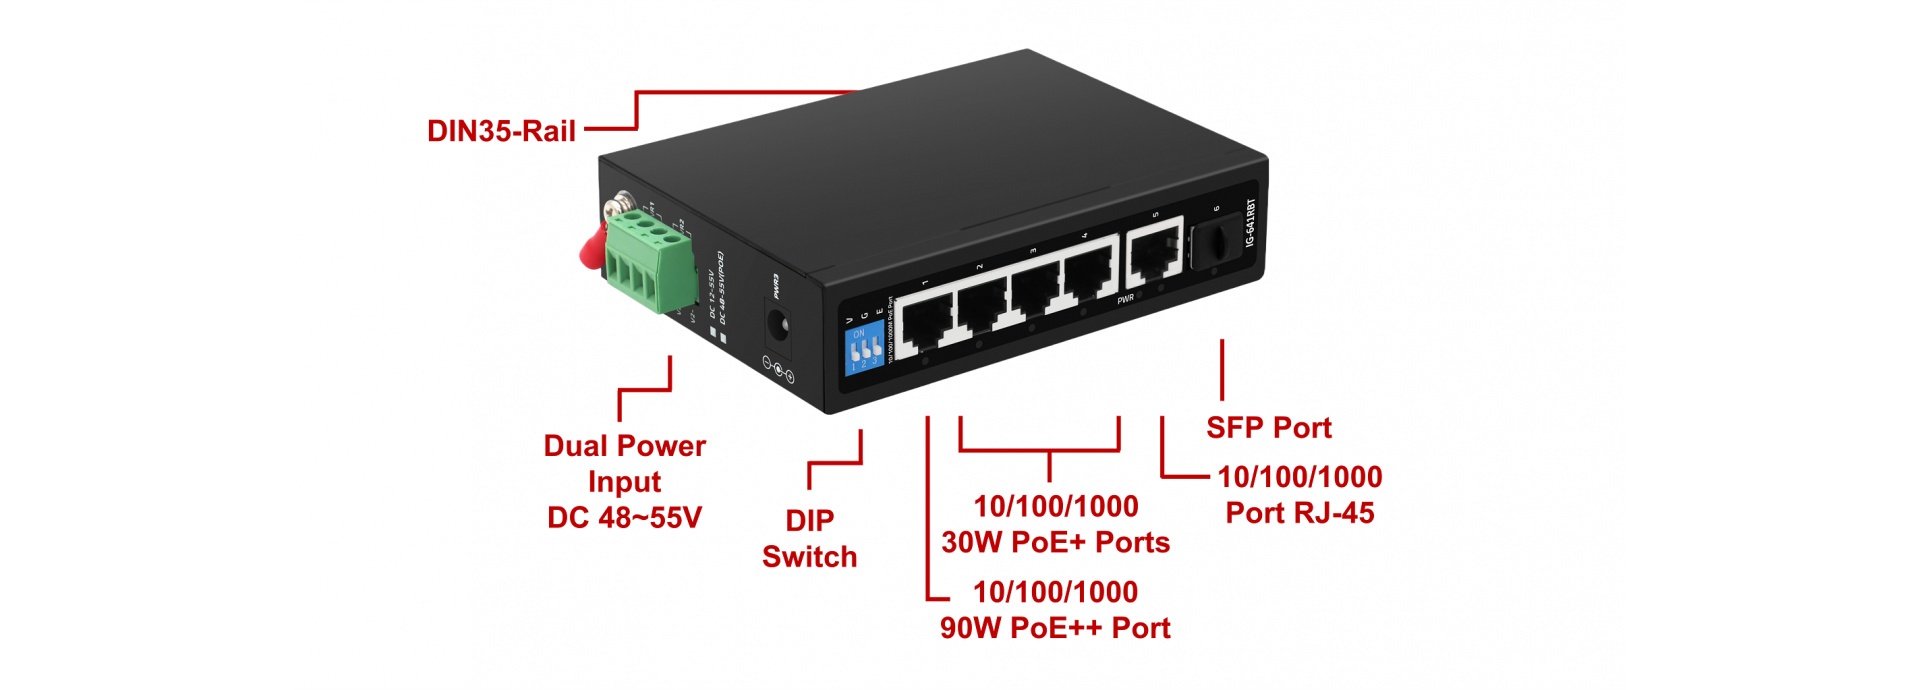 Reliable Industrial-grade Unmanaged POE Switch for extreme environment